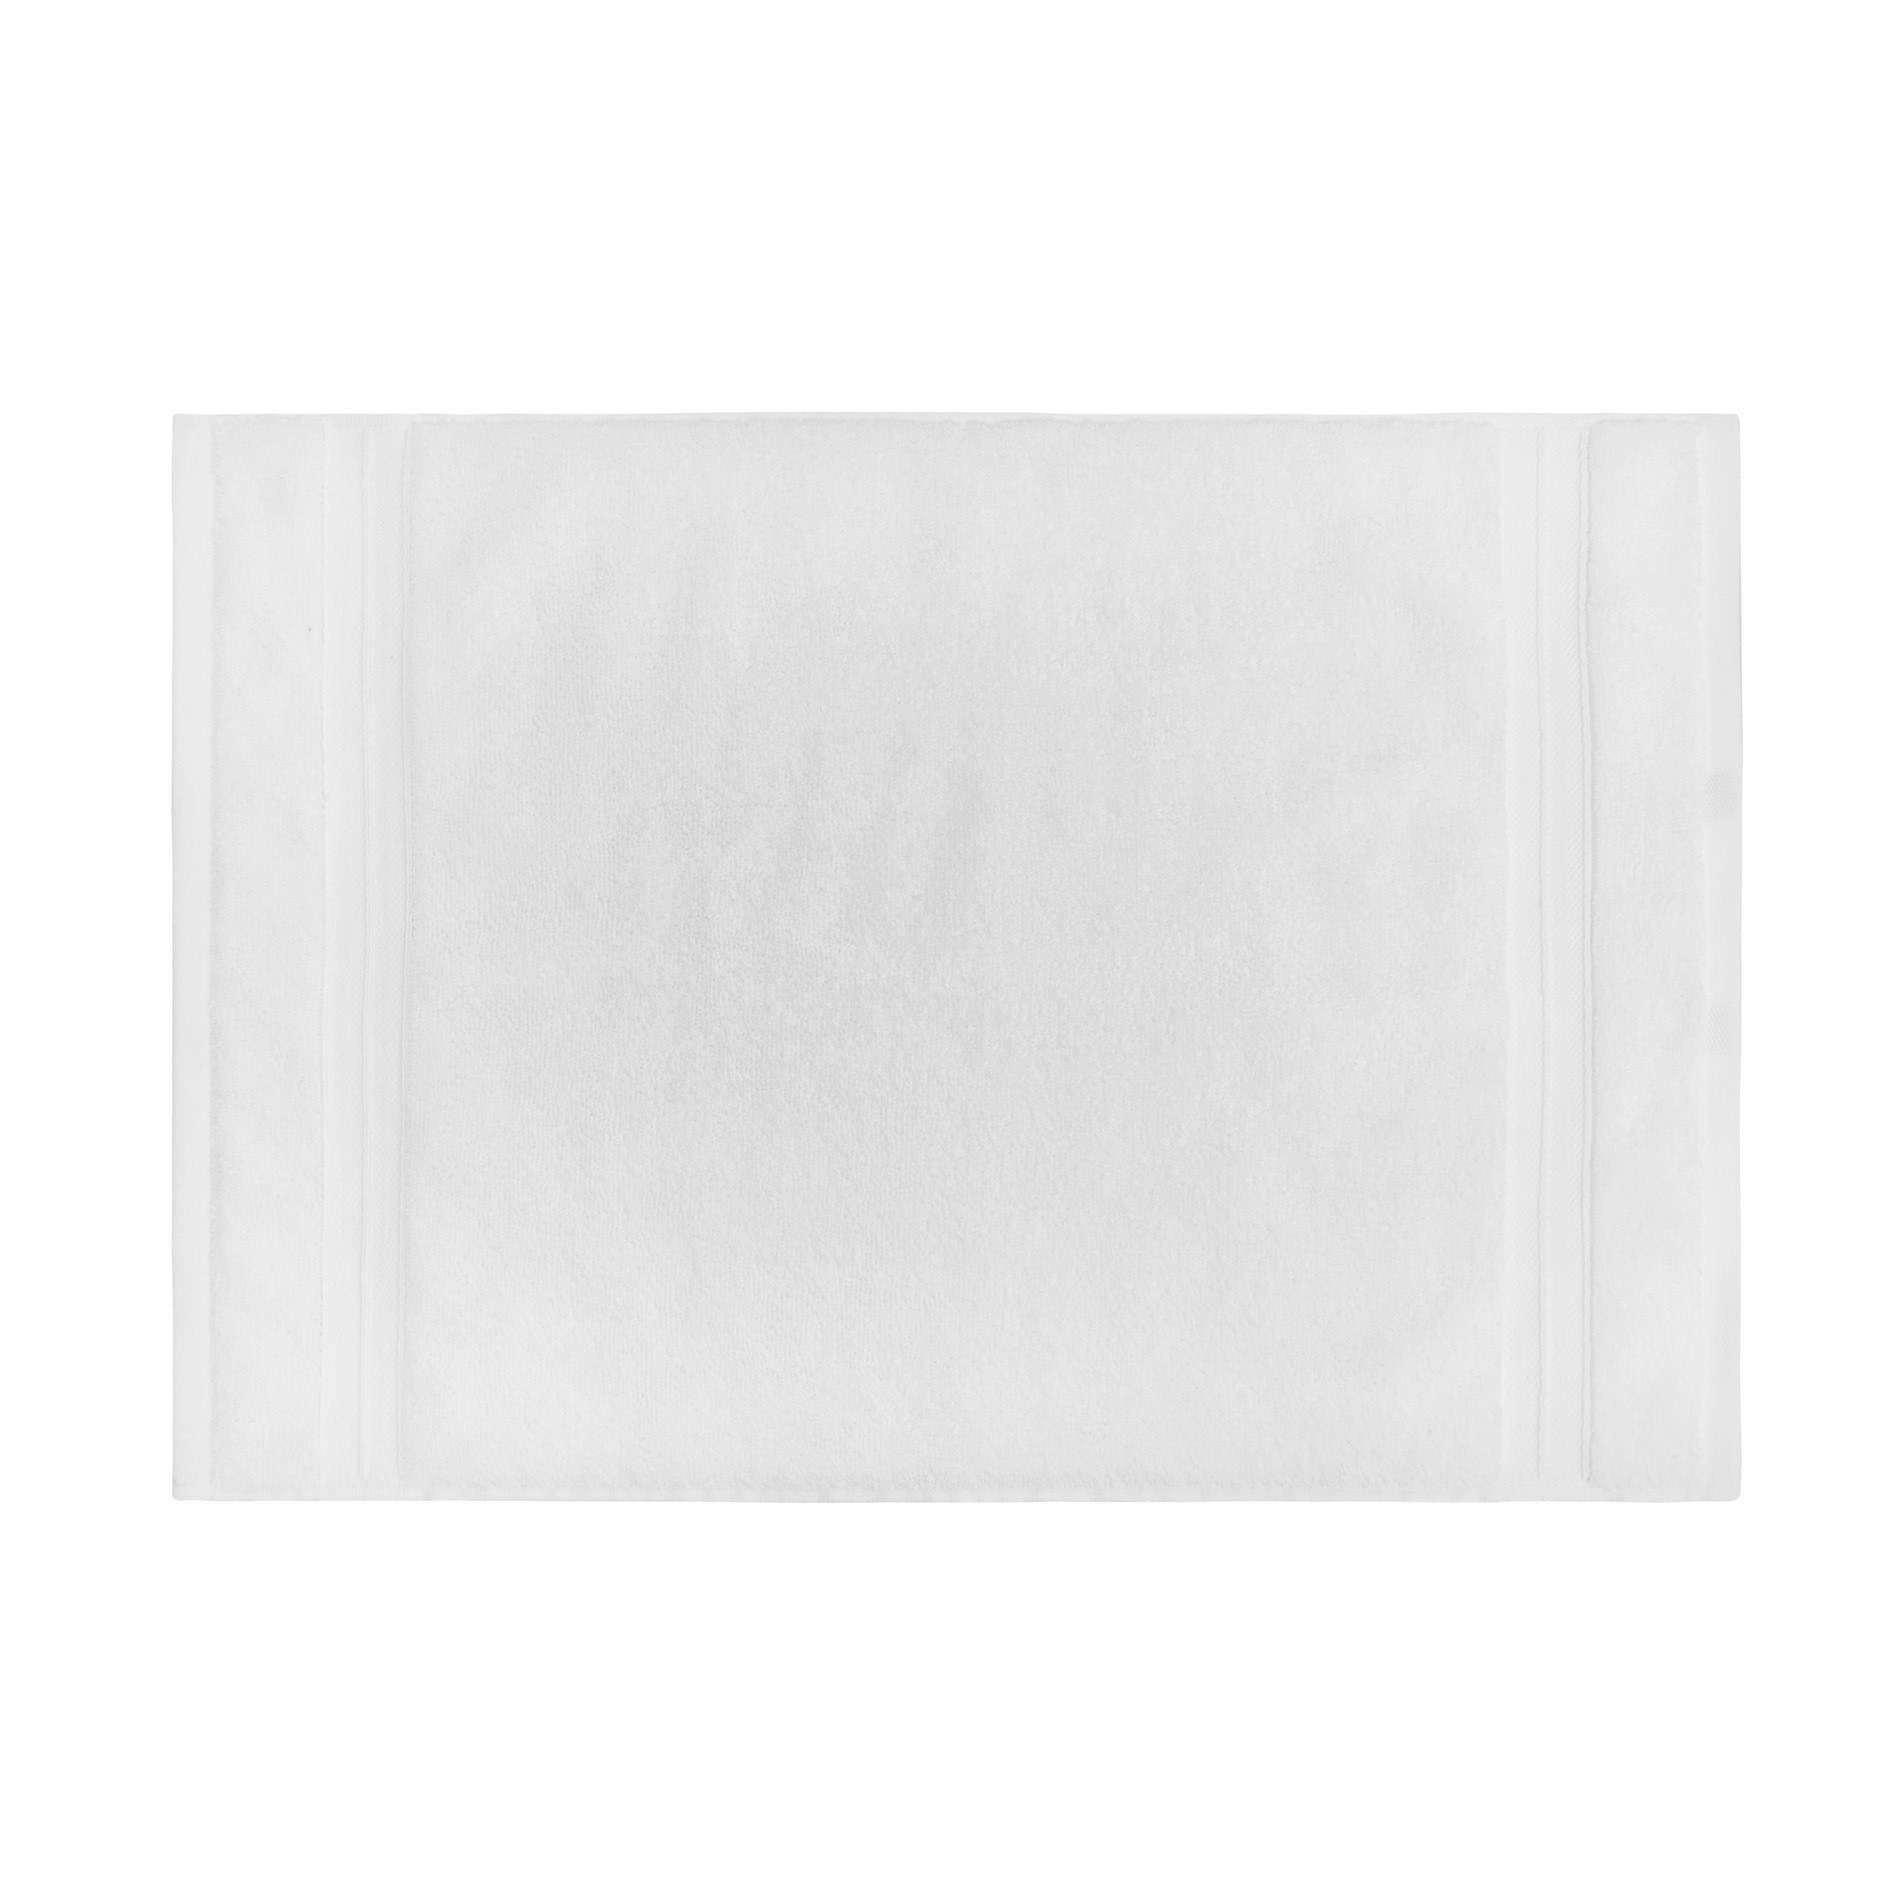 Thermae solid colour 100% cotton towel, White, large image number 2